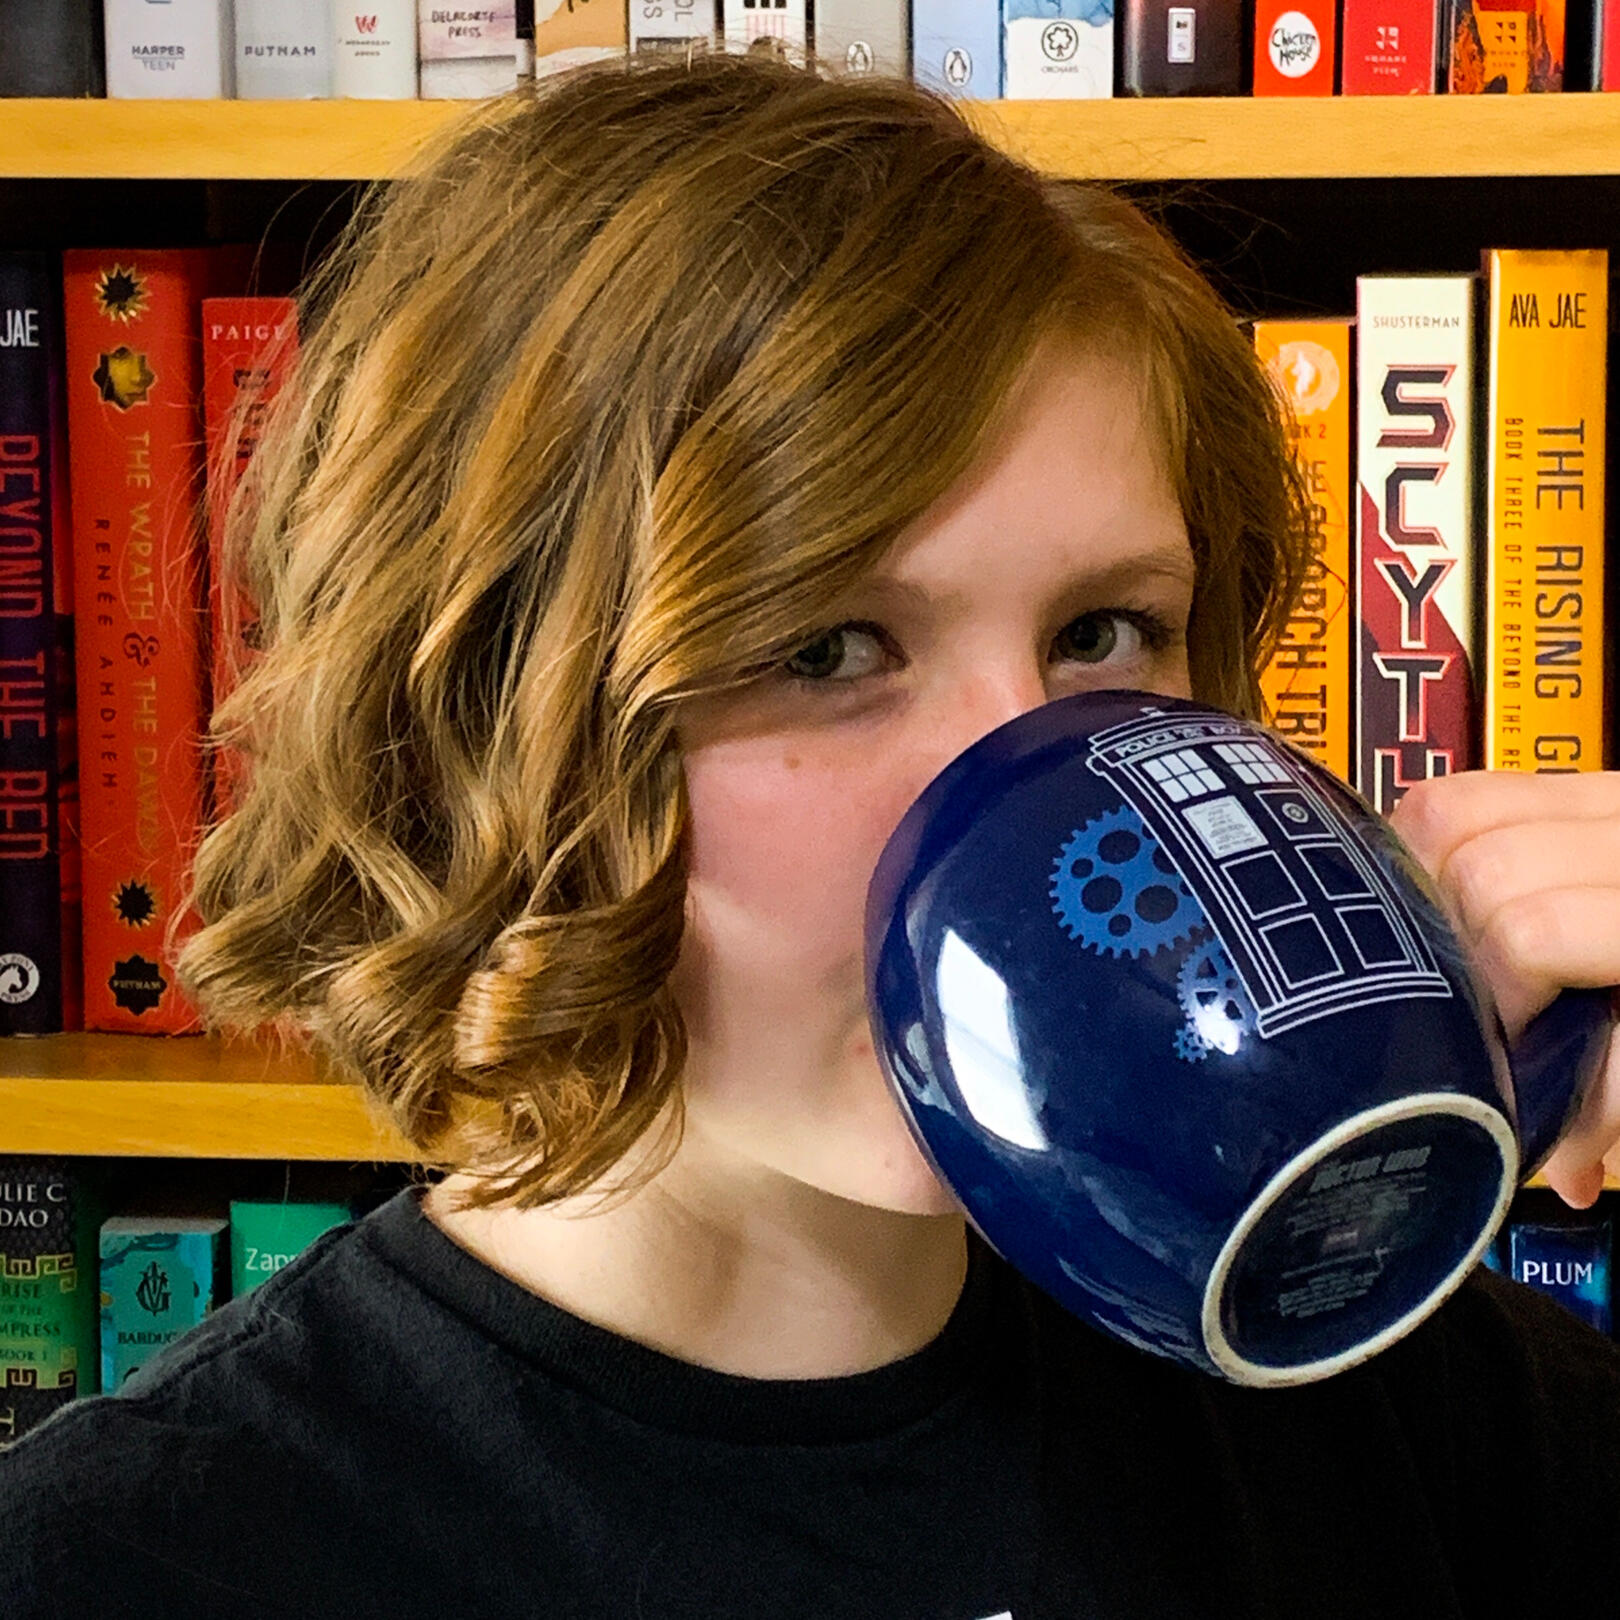 A white woman with short curly reddish-blond hair drinking out of a TARDIS mug with a colorful bookshelf behind her.